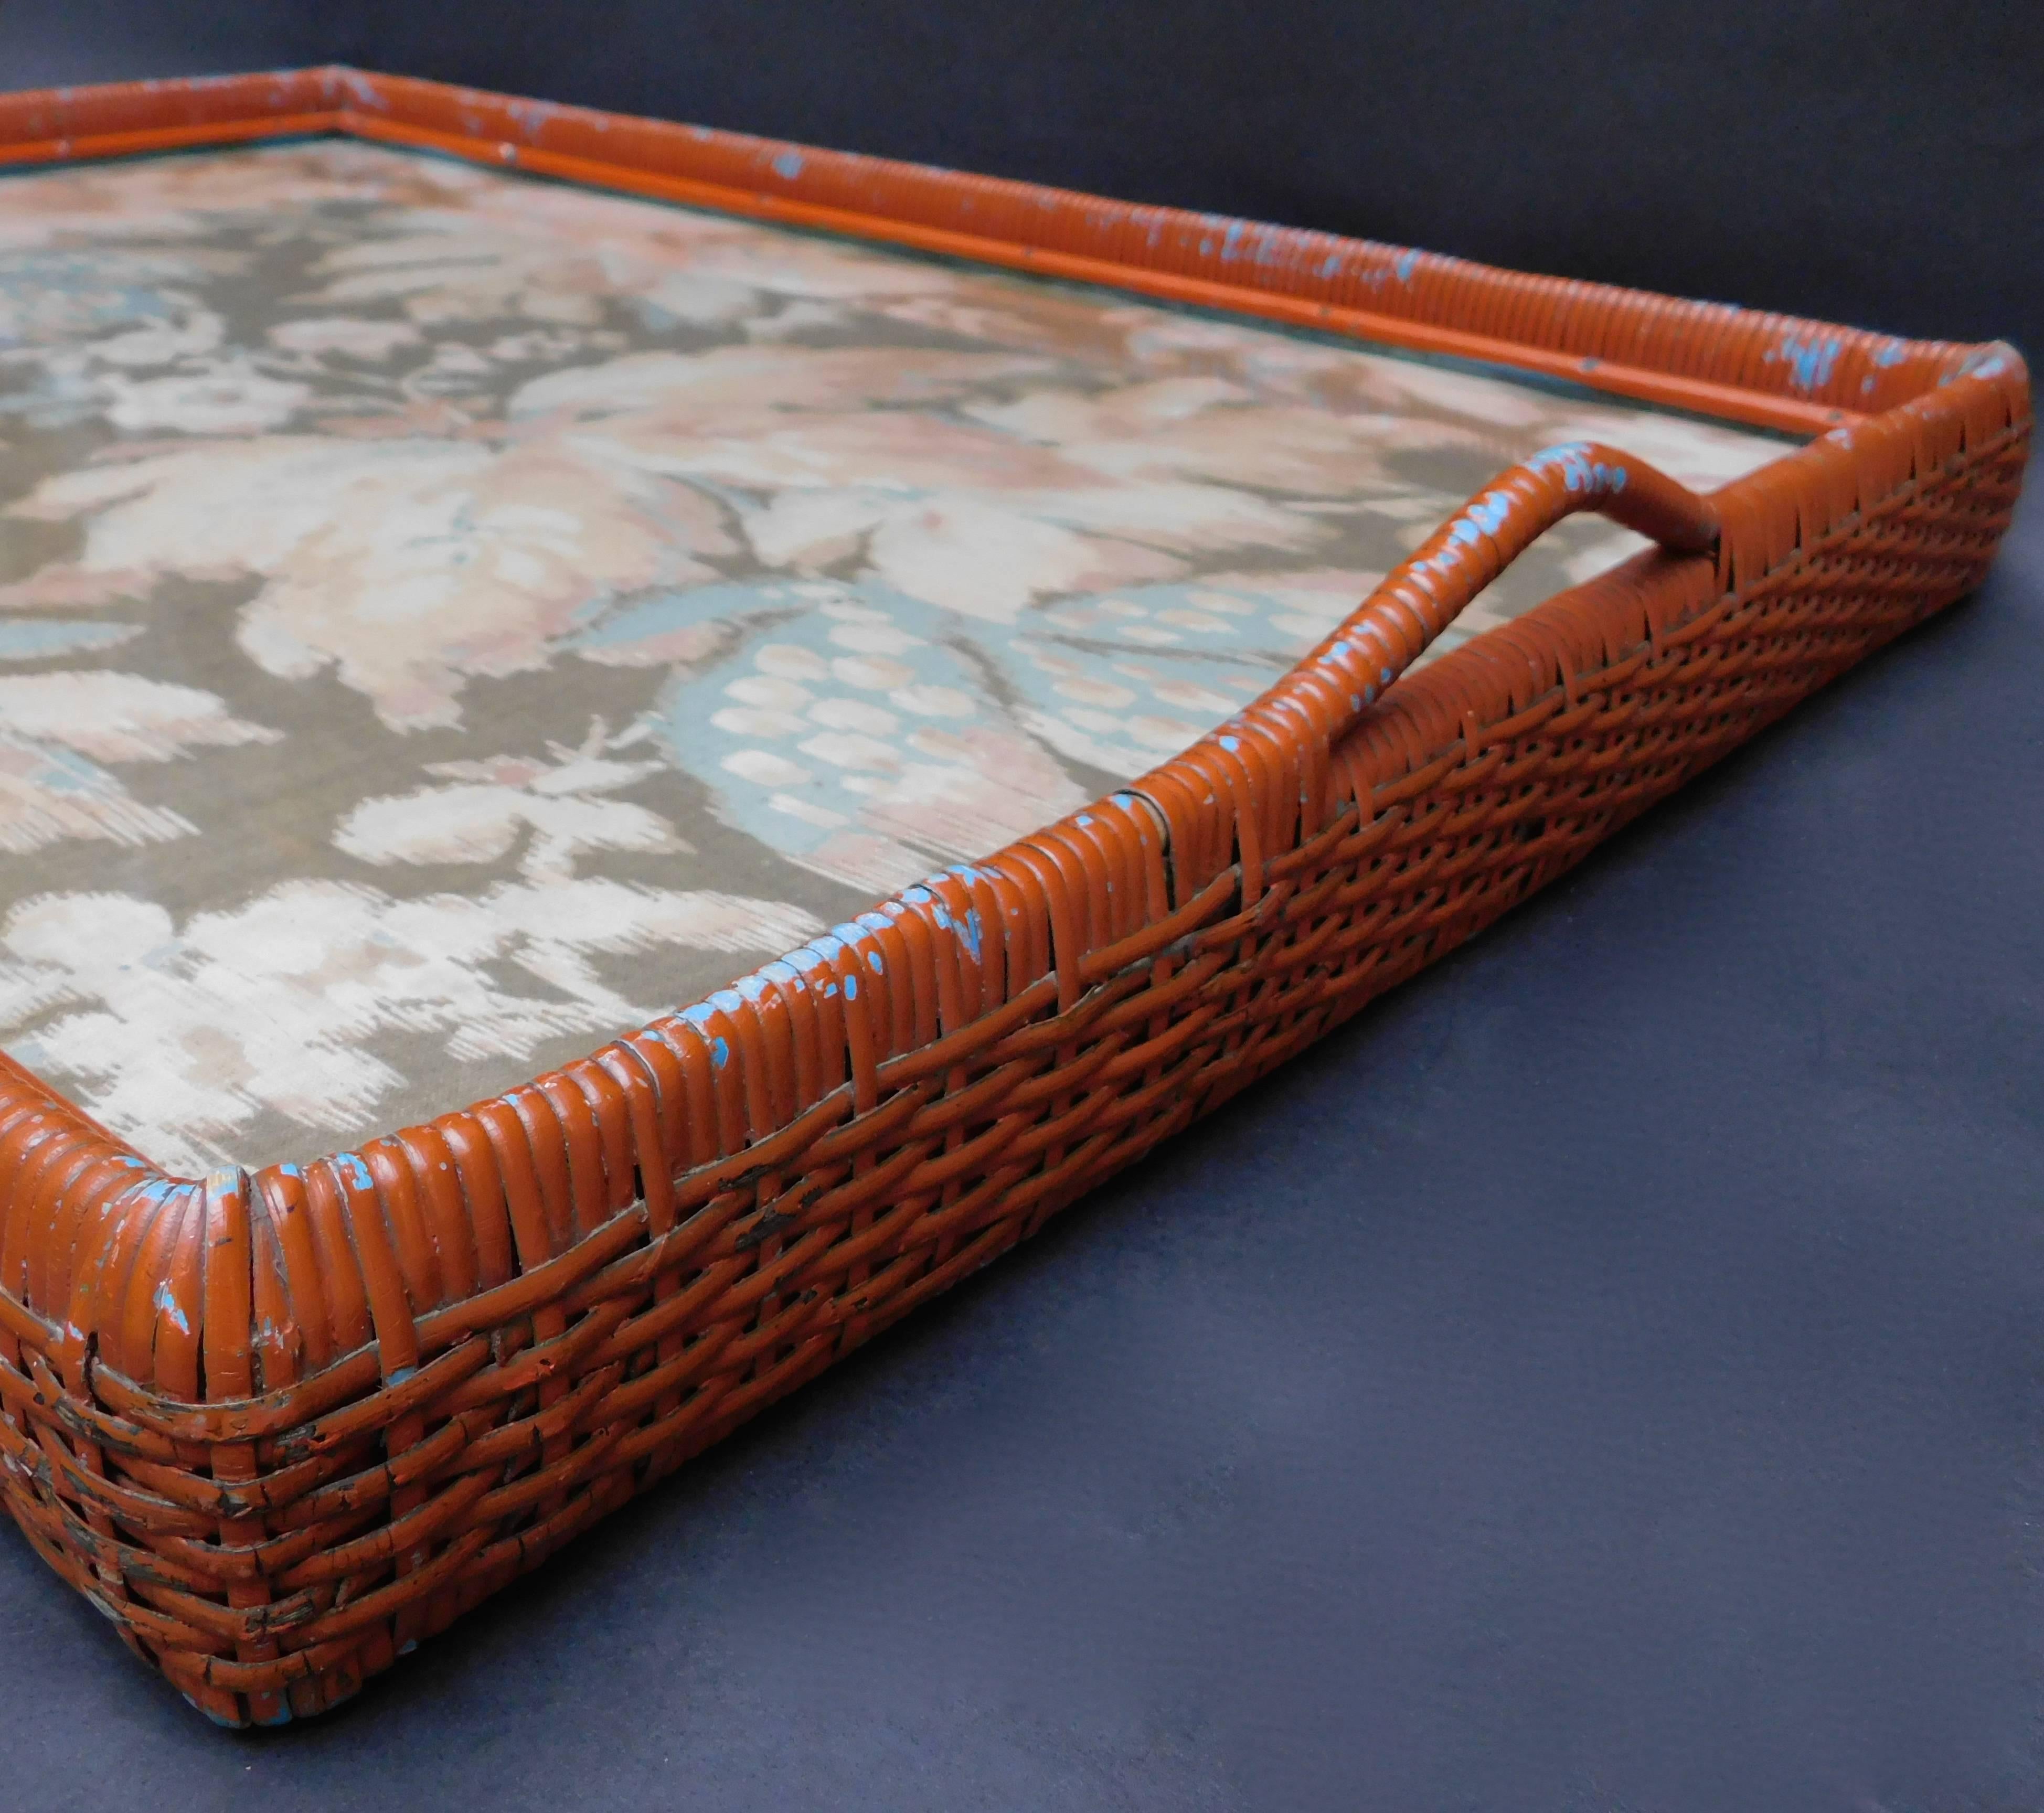 British 19th Century English Painted Wicker Tray with Original Ikat Textile under Glass For Sale